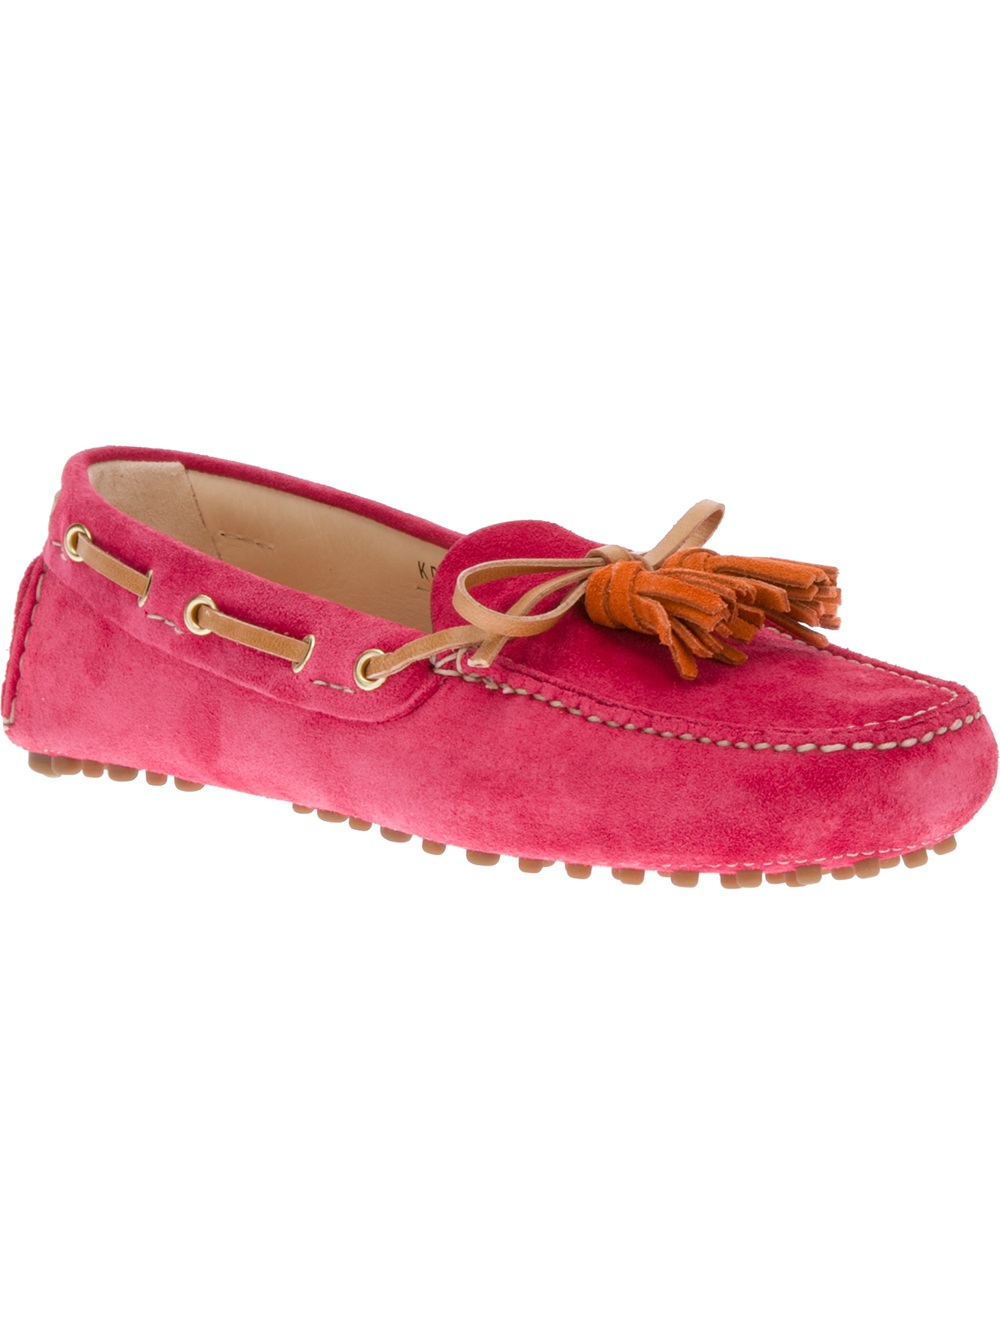 Lyst - Car shoe Driving Shoe in Pink